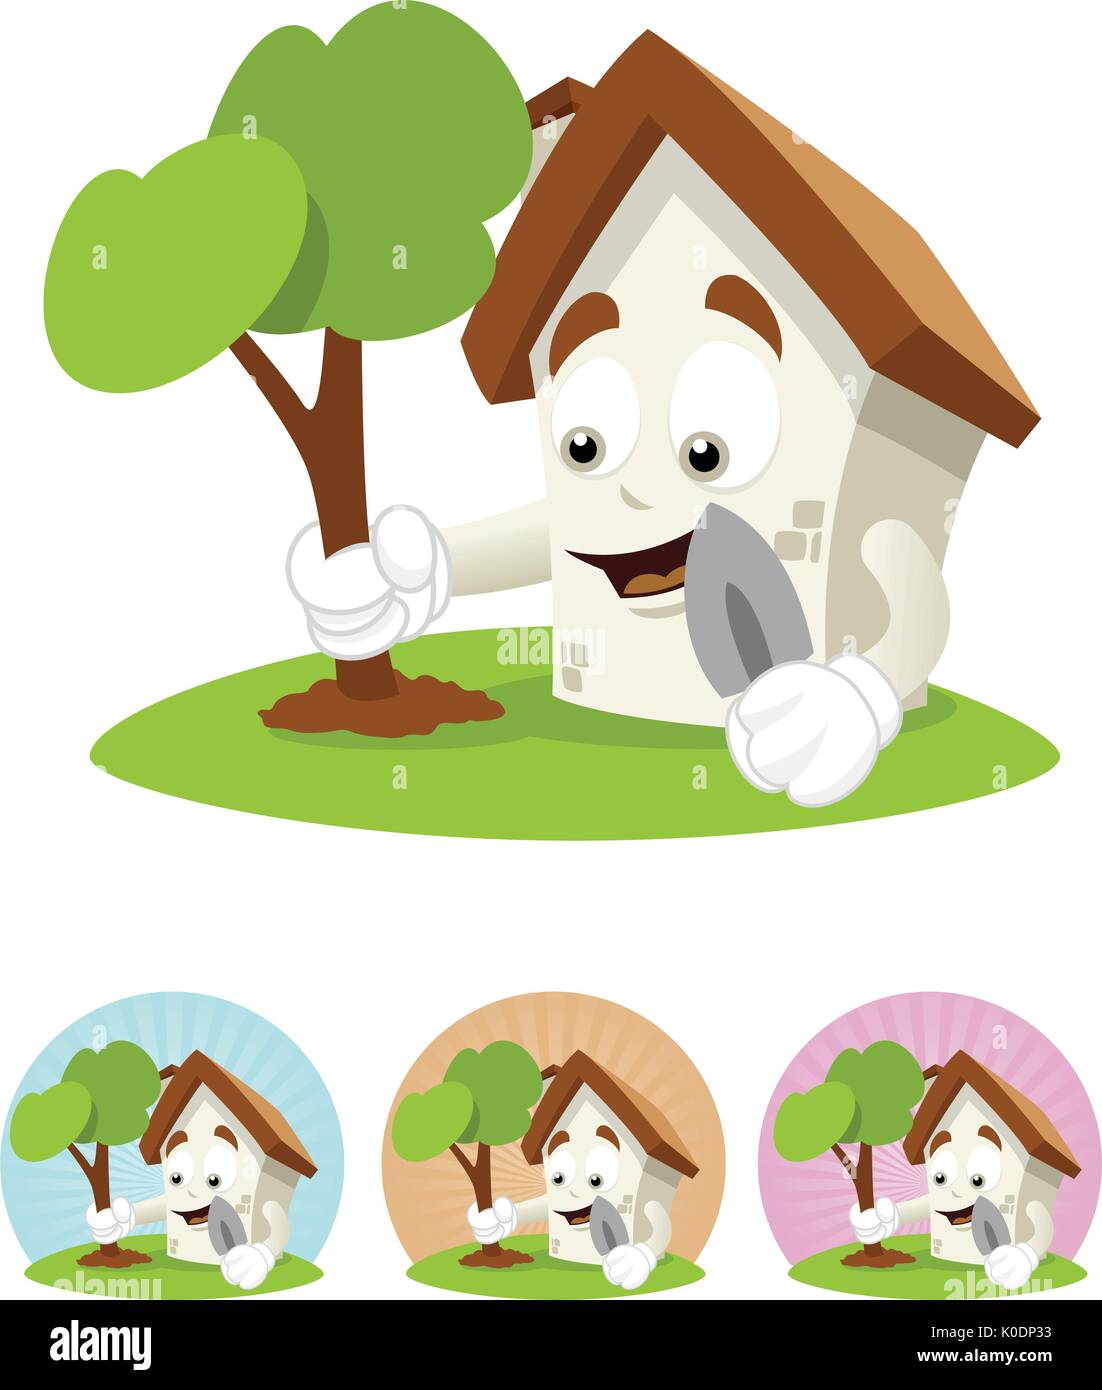 House character planting a tree Stock Vector